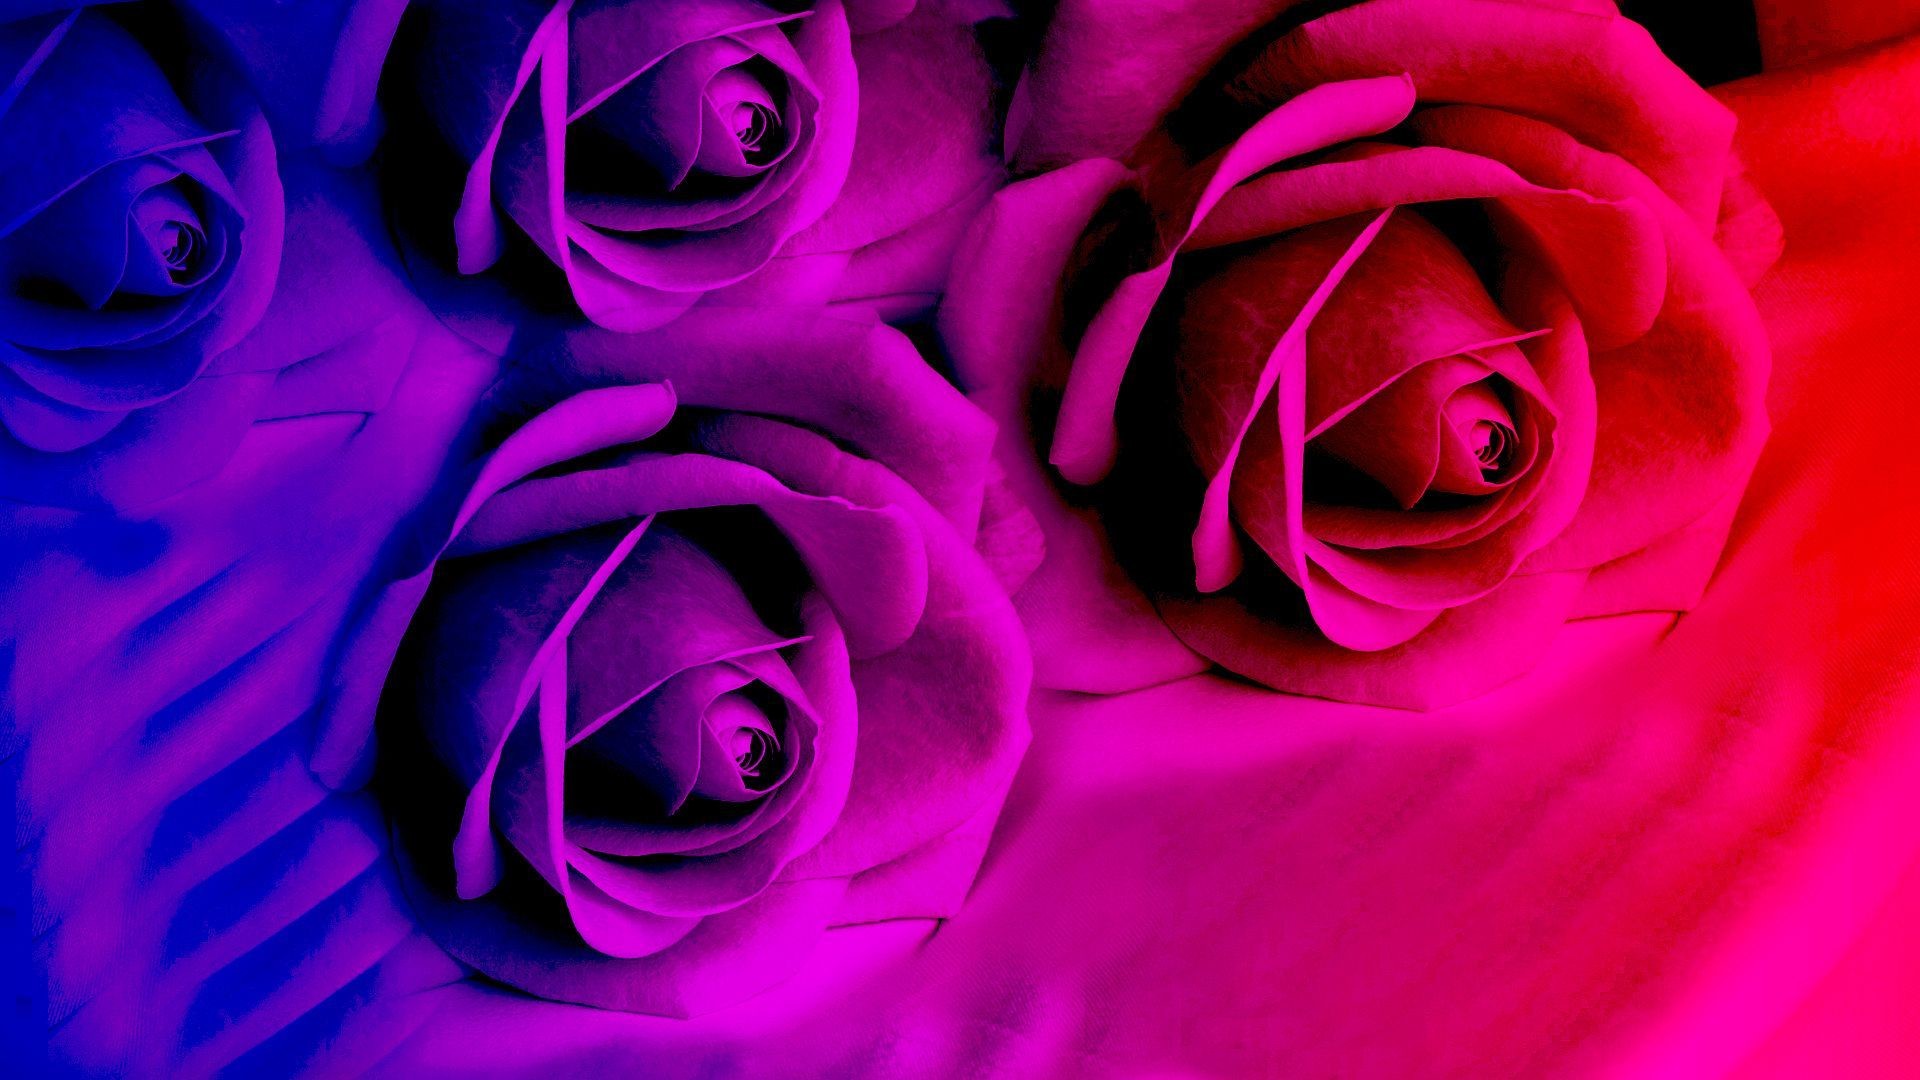 1920x1080 Purple roses in bright color wallpapers and images - wallpapers .